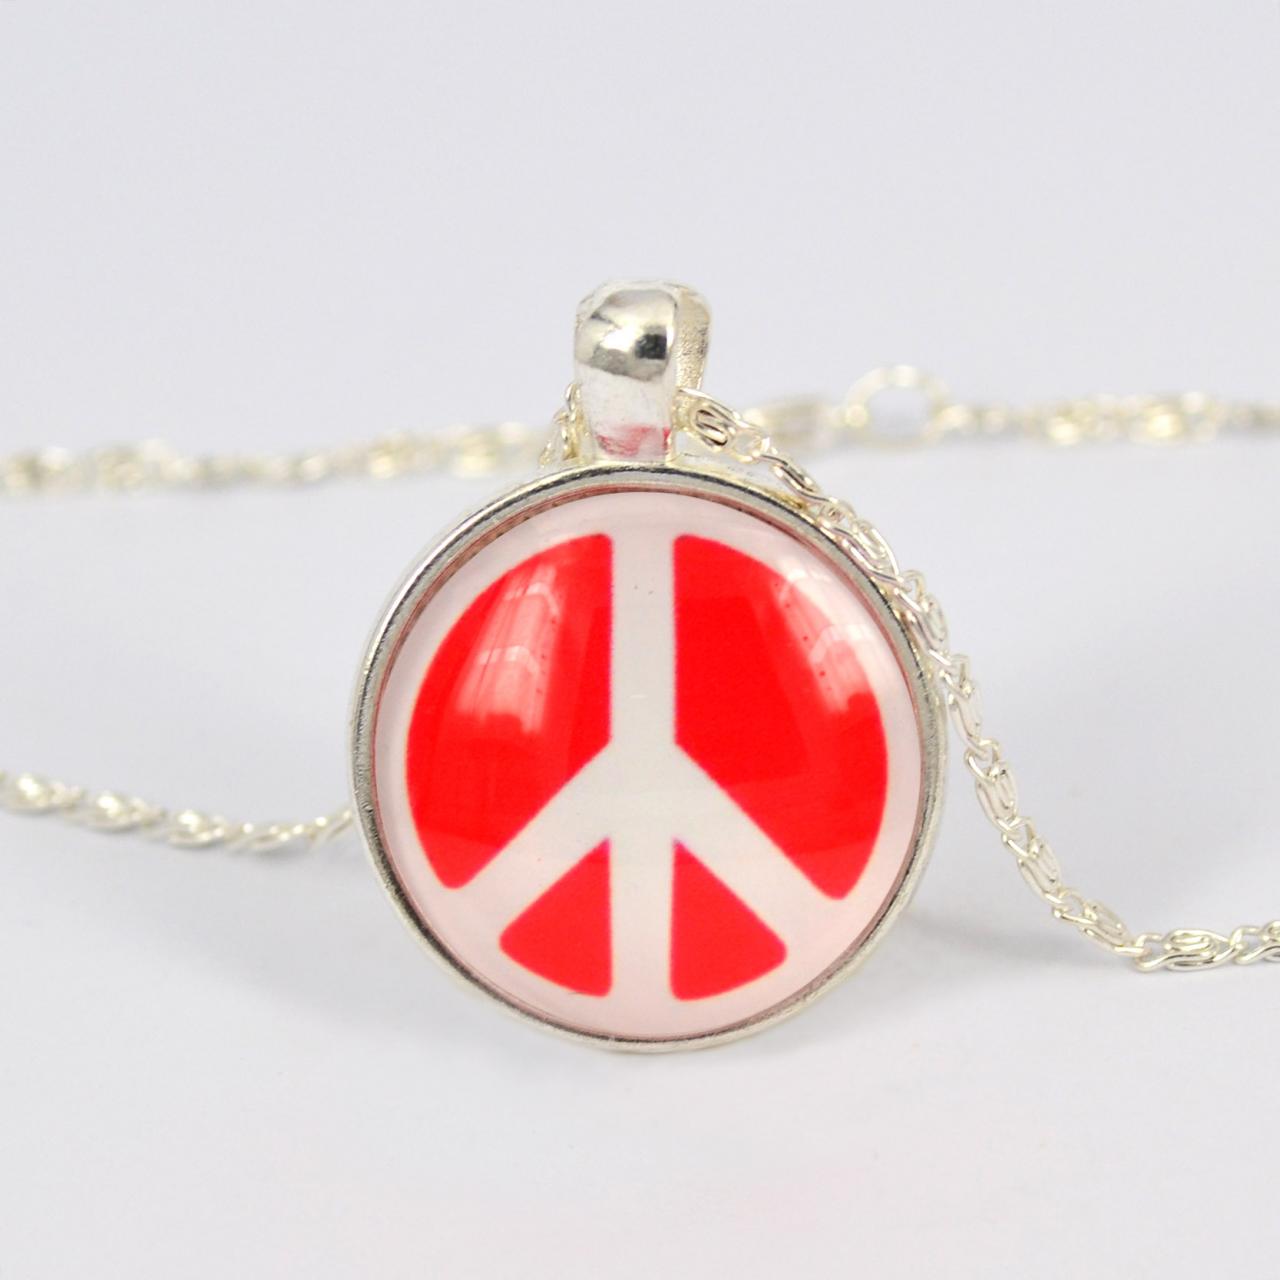 Vintage Red, Peace Sign Pendant Glass Cabochon Necklace,silver Plated, #ib724